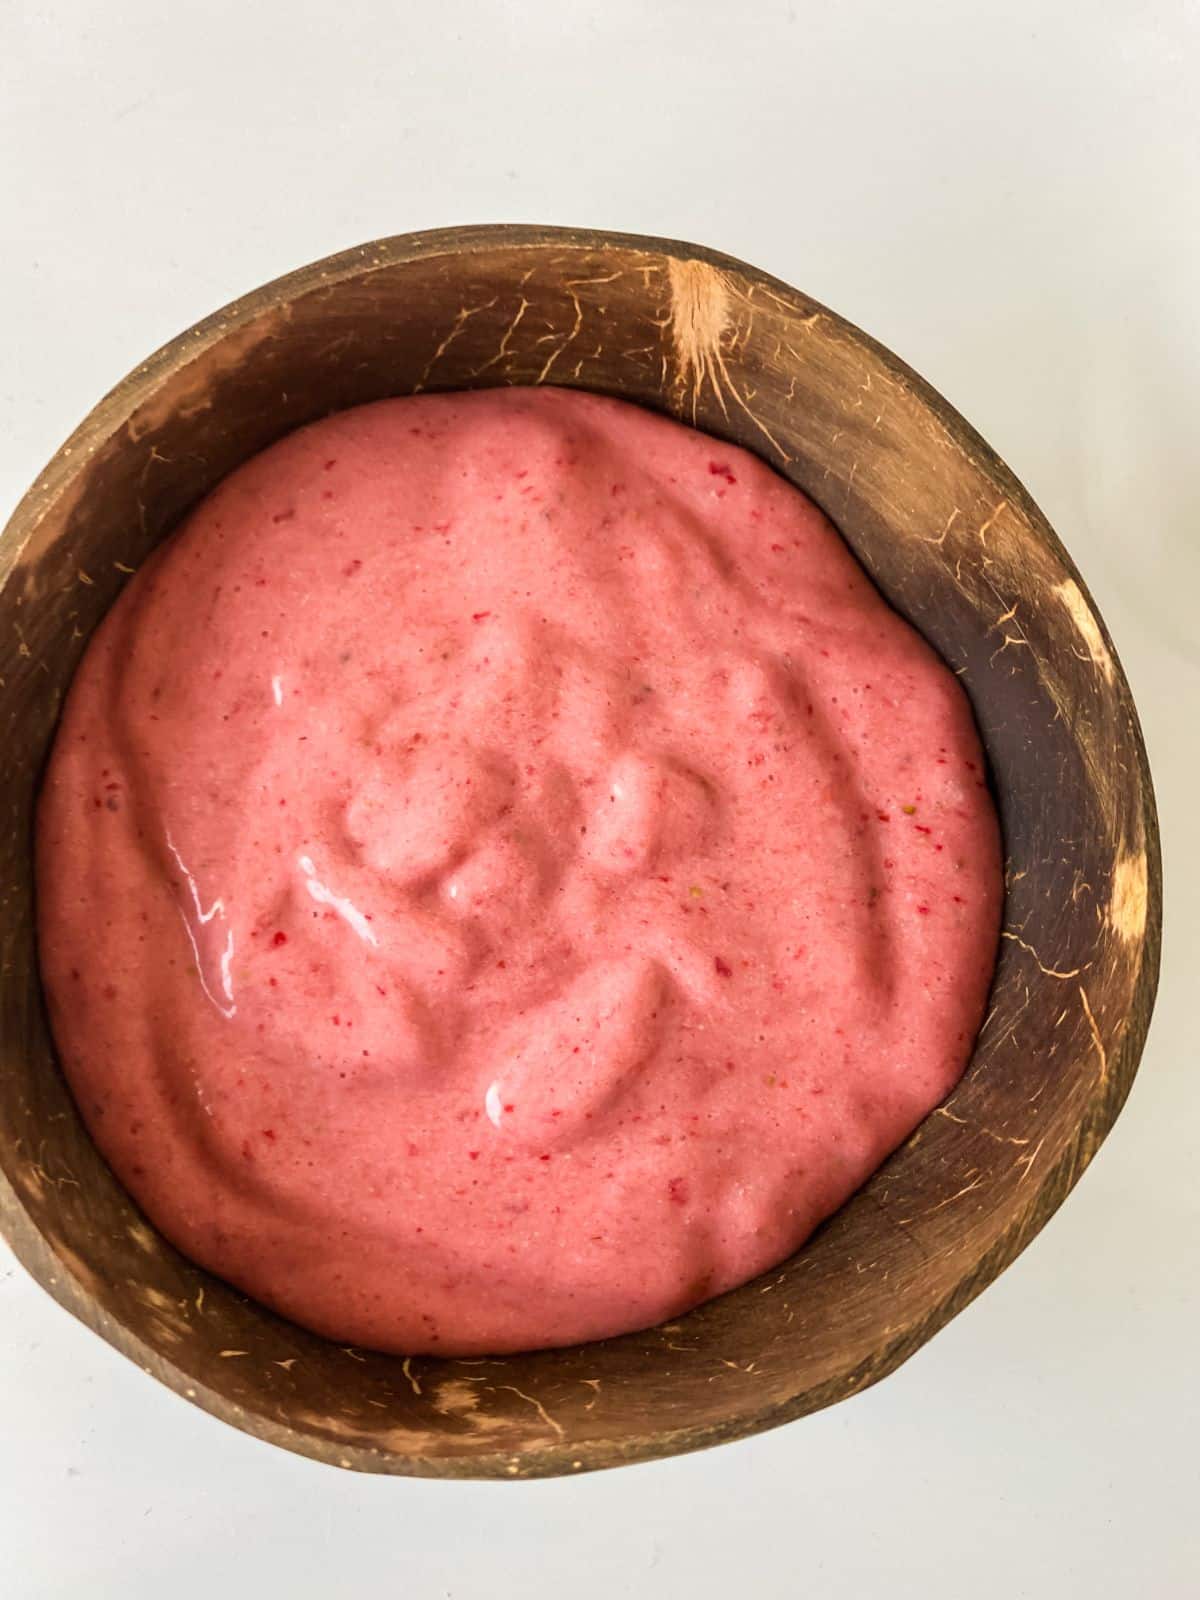 strawberry banana smoothie bowl in wood bowl